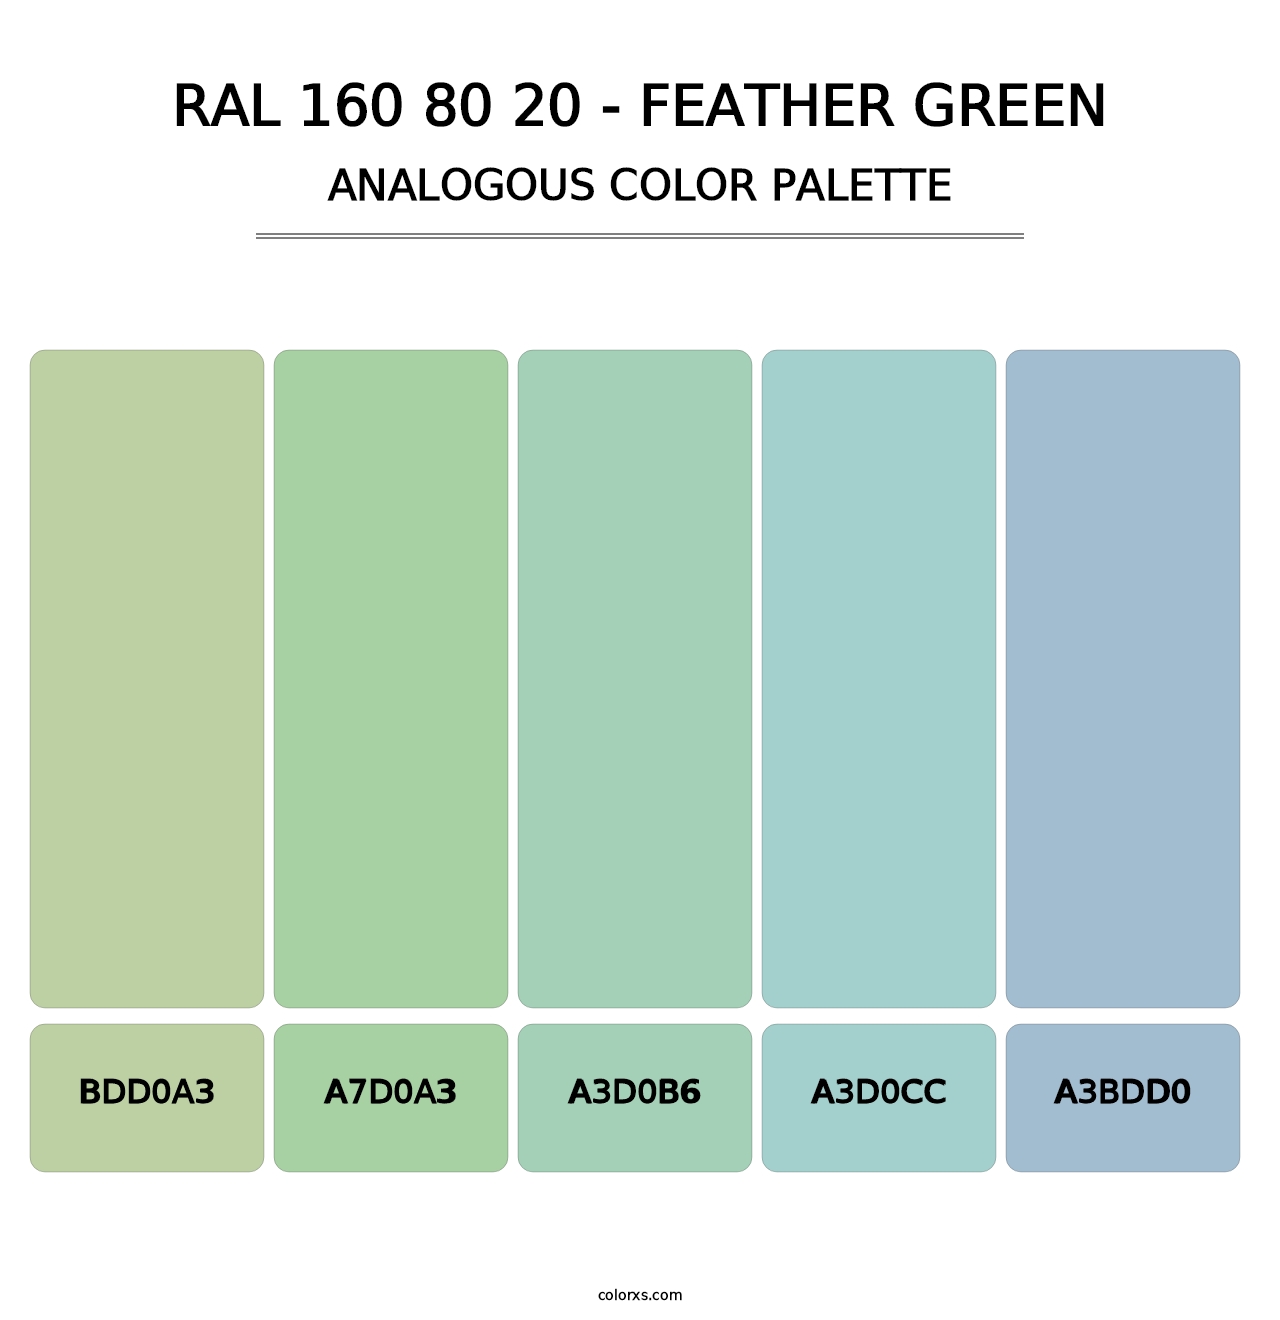 RAL 160 80 20 - Feather Green - Analogous Color Palette